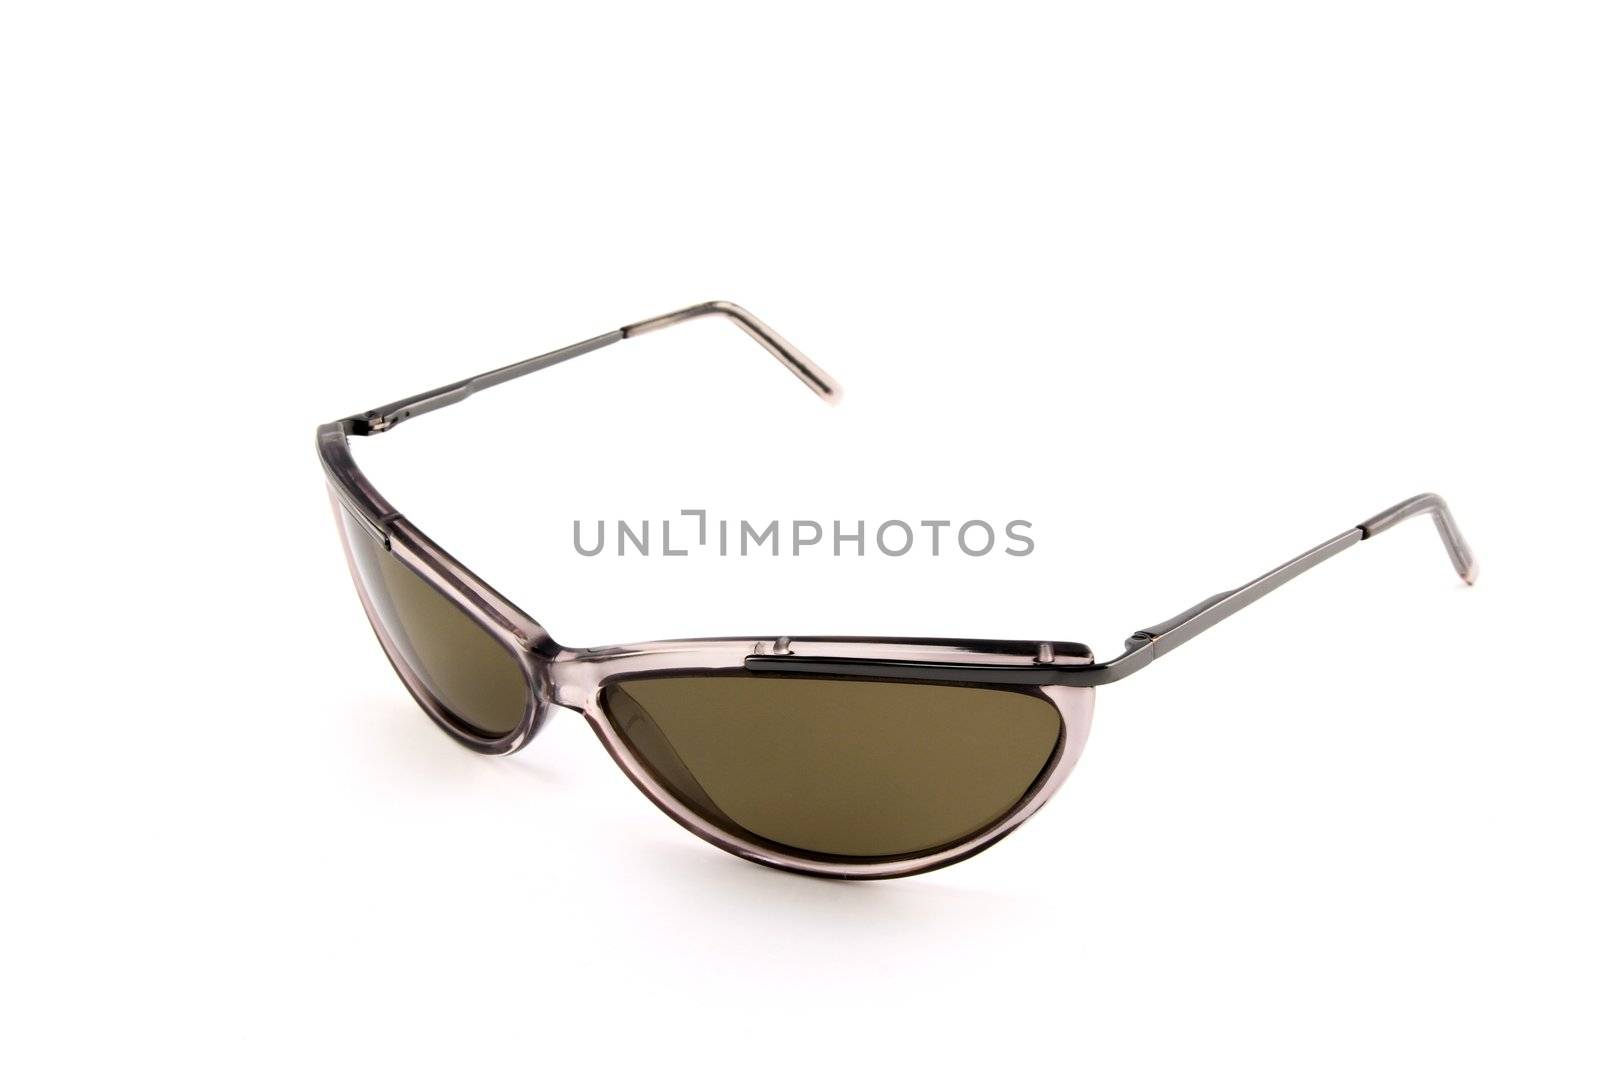 Brown stylish sunglasses isolated on white background, side view.